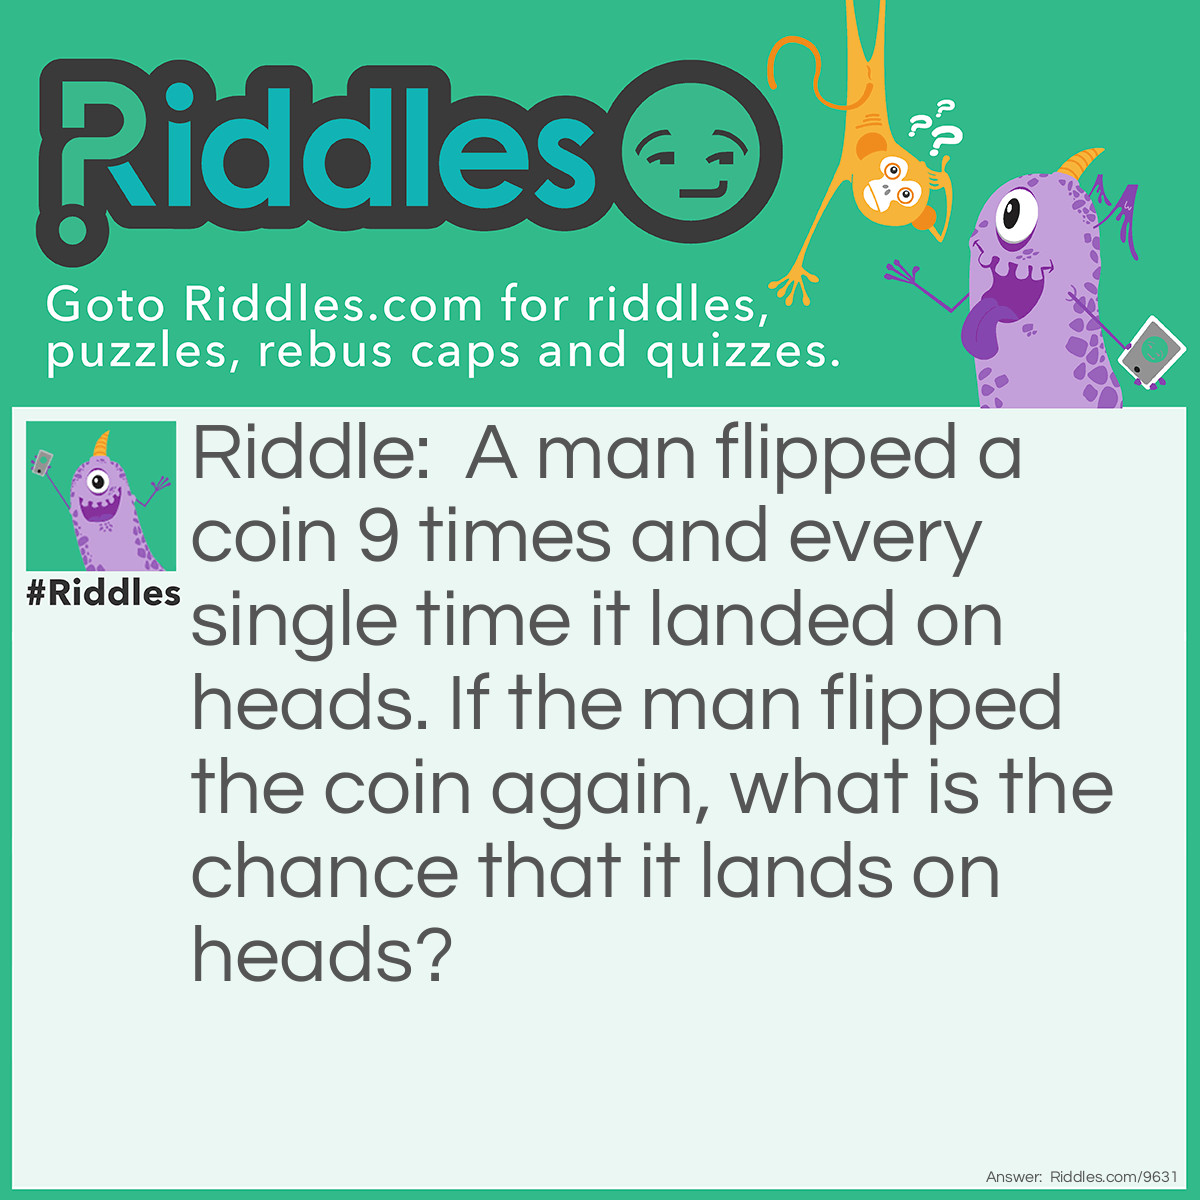 Riddle: A man flipped a coin 9 times and every single time it landed on heads. If the man flipped the coin again, what is the chance that it lands on heads? Answer: 50%. It's always 50%.